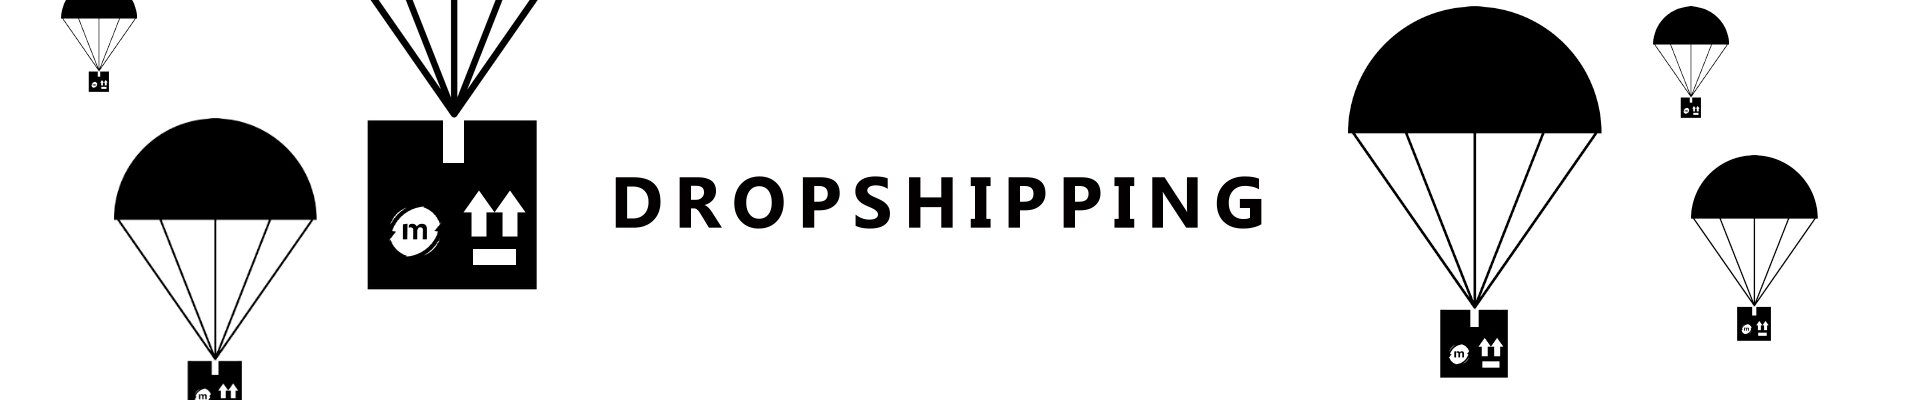 Dropshipping is now available!